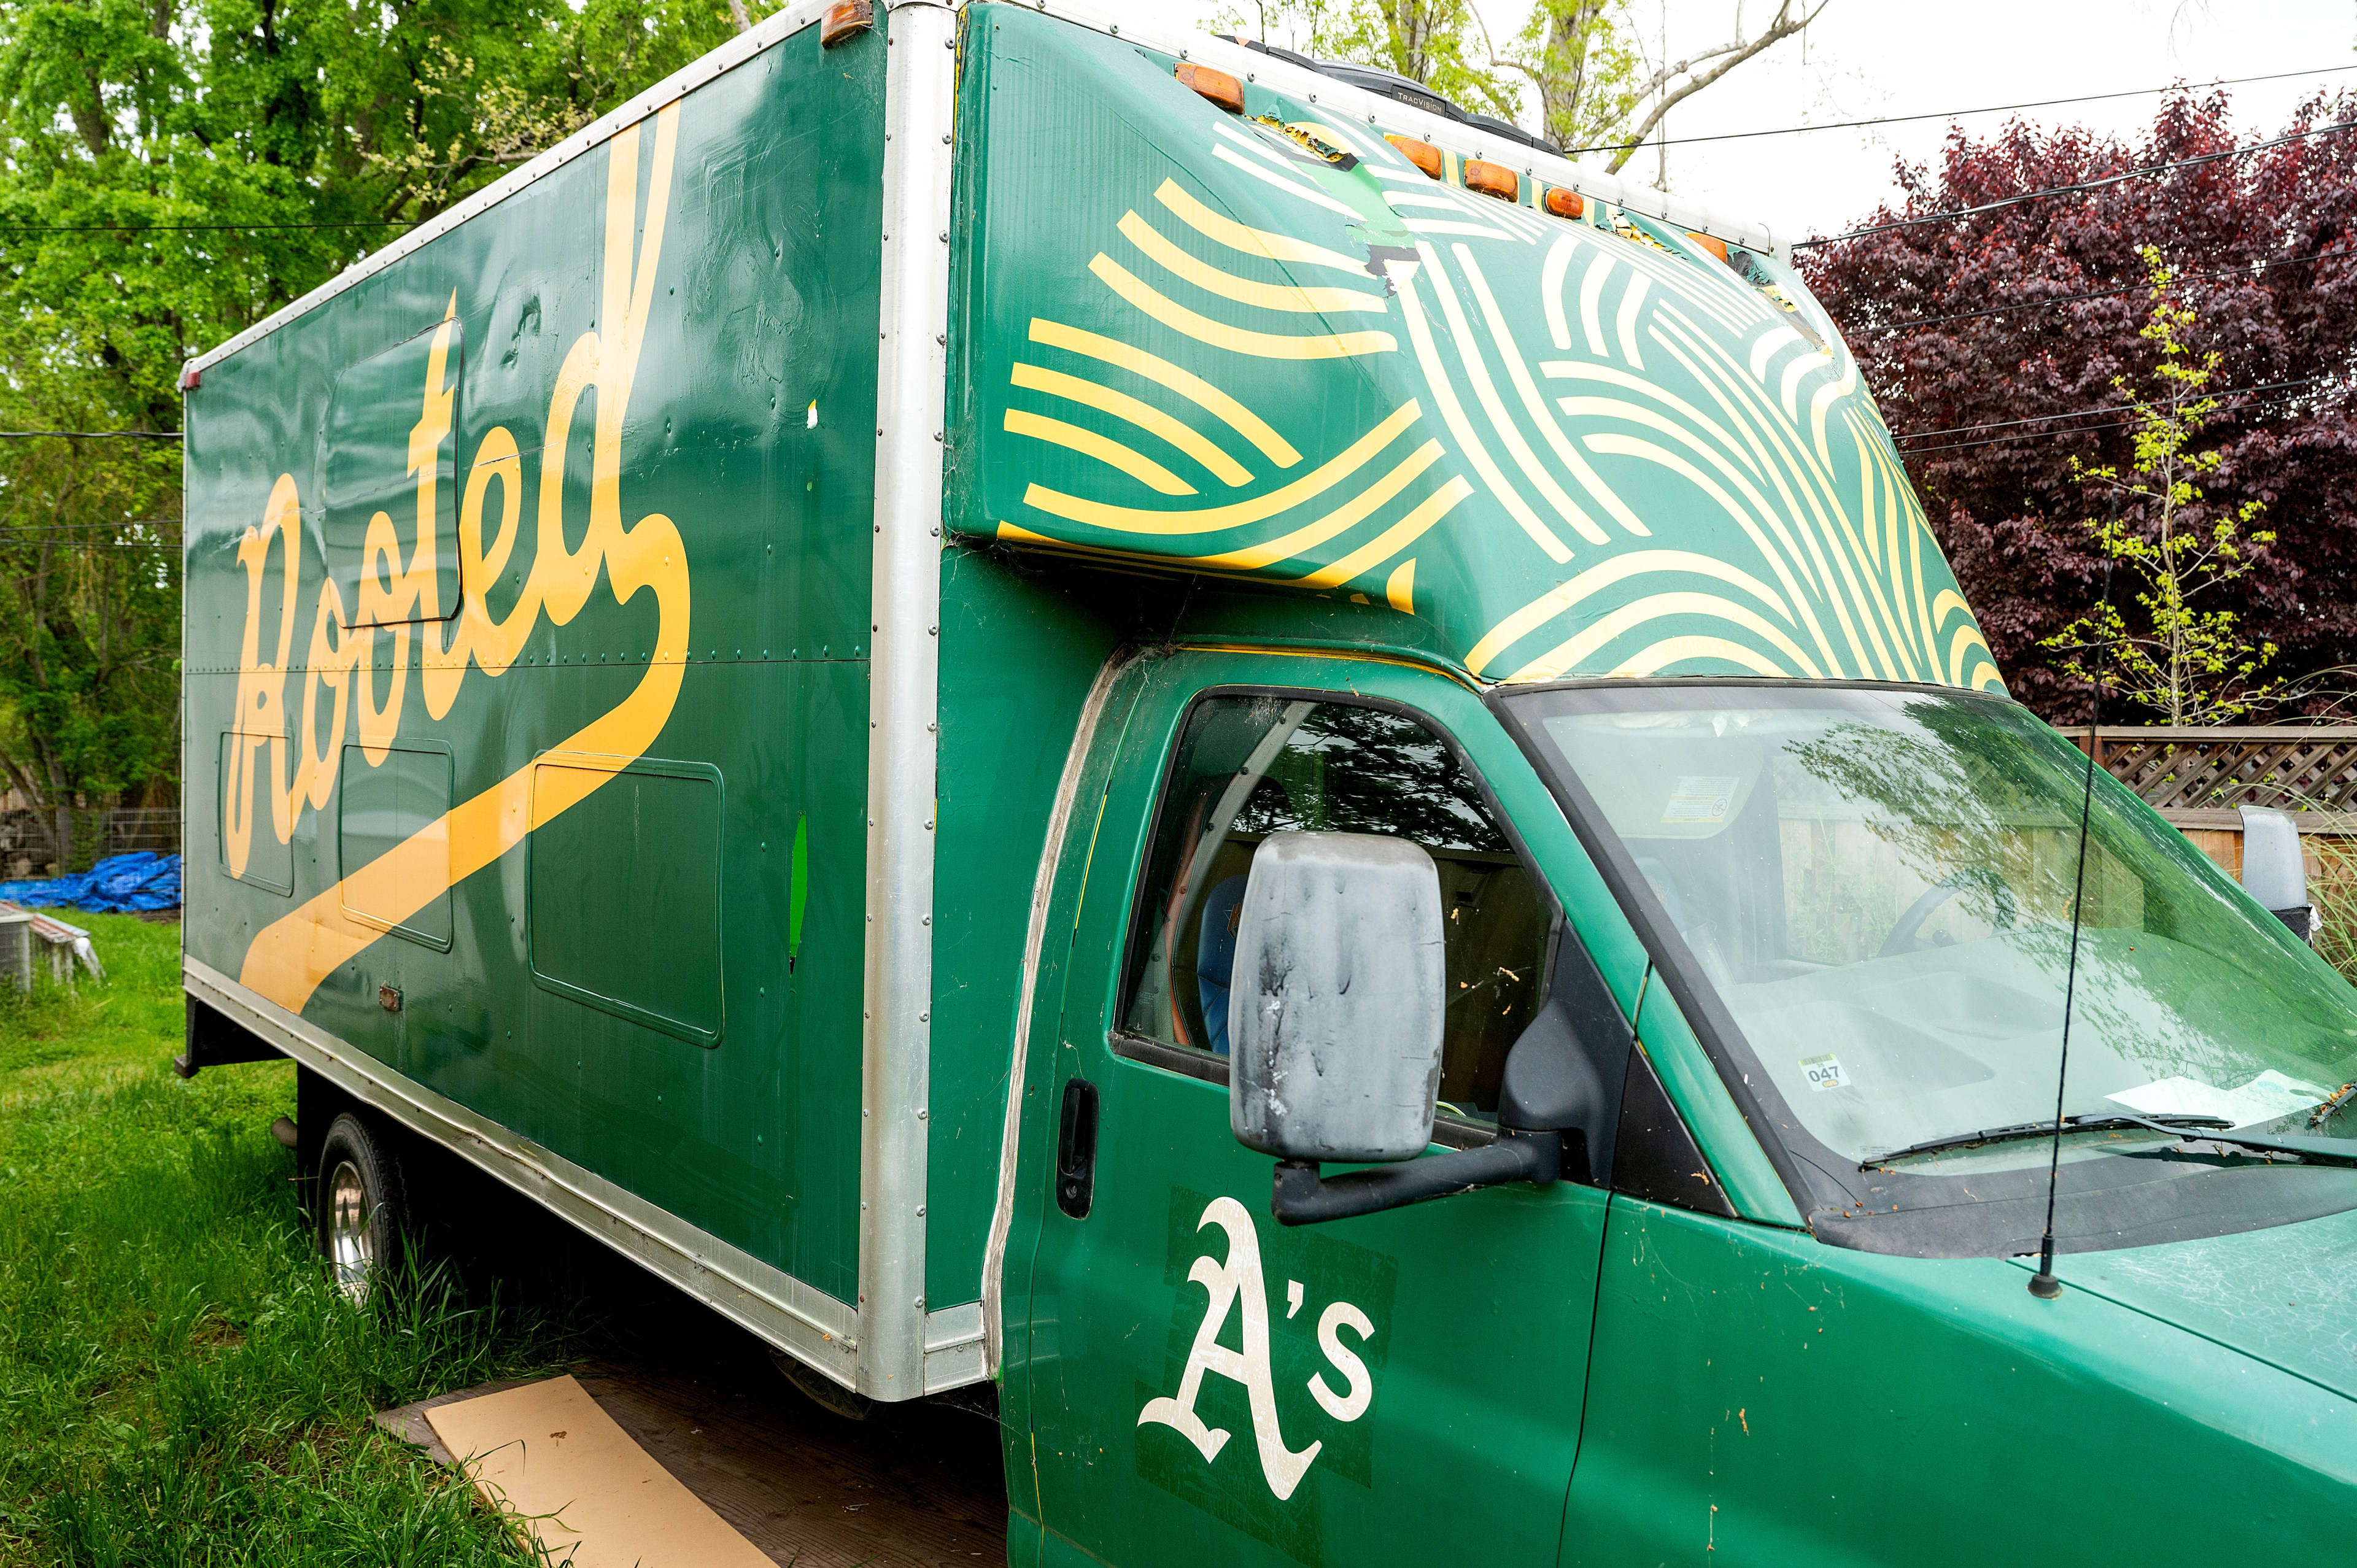 A green delivery truck with "Roasted" written on it is parked beside some vegetation.